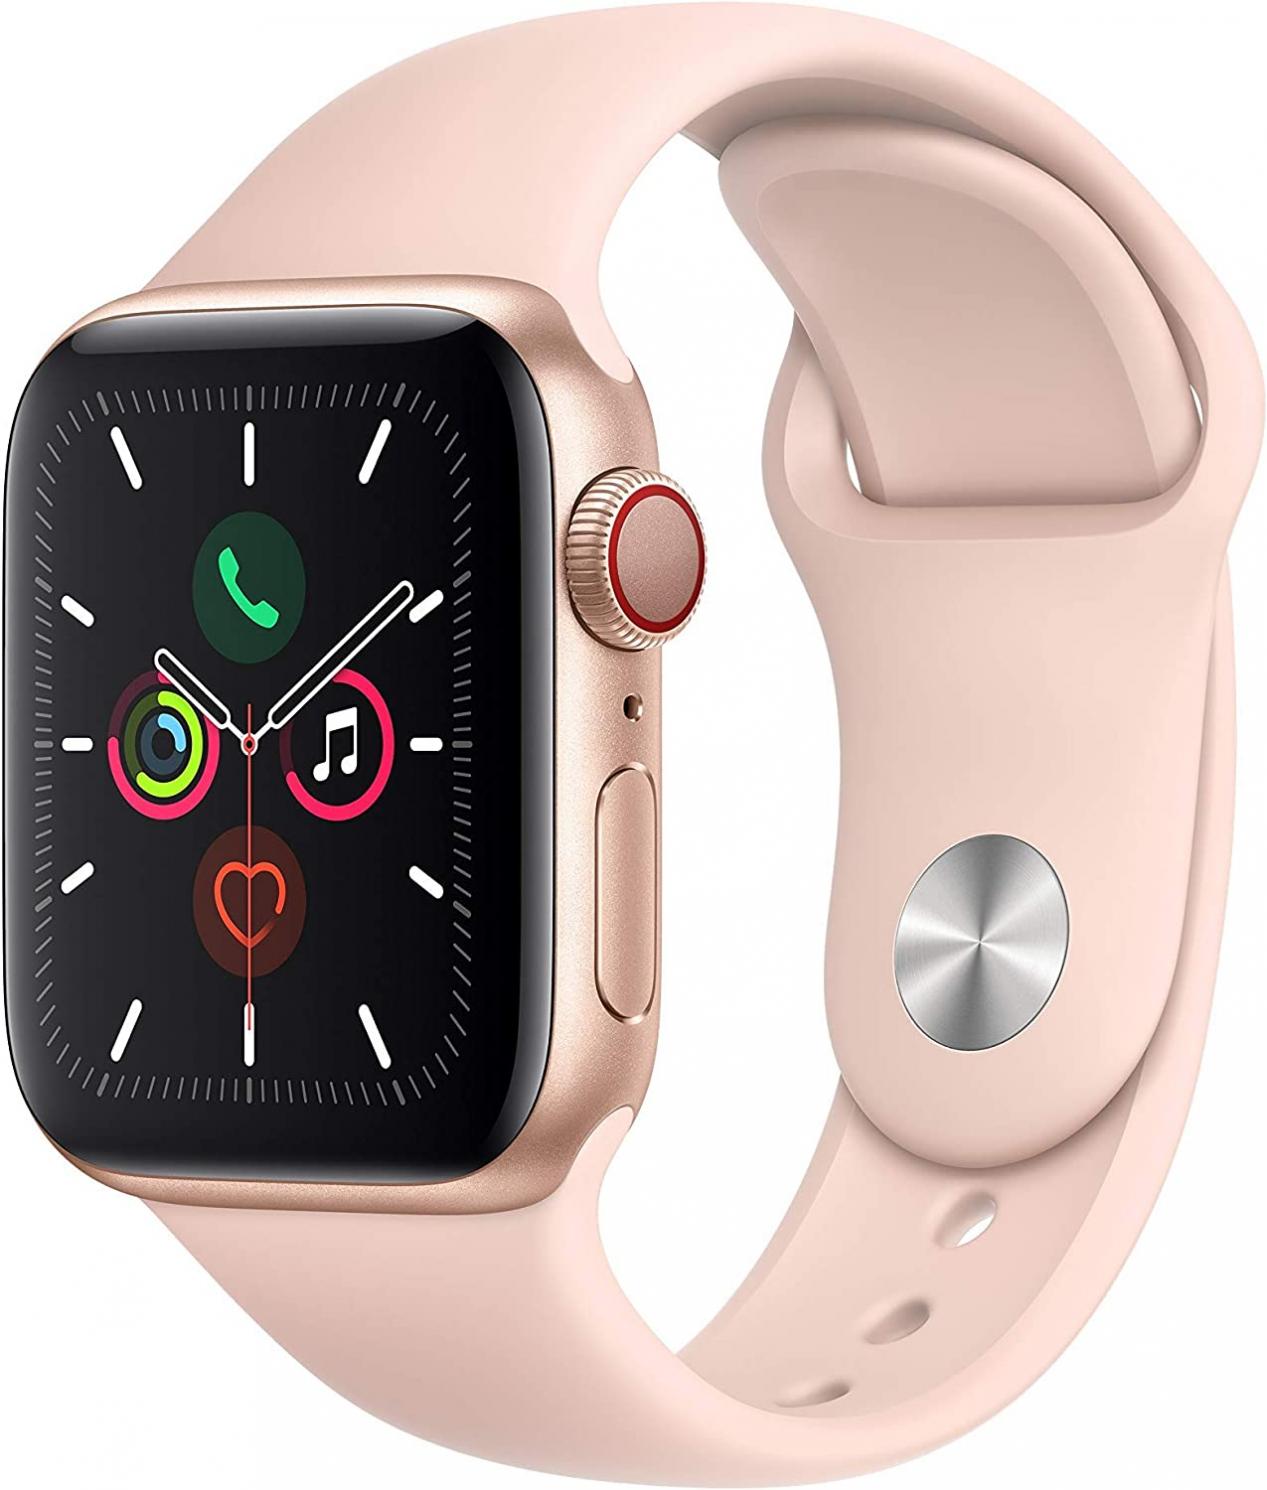 Apple Watch Series 5 (GPS + Cellular, 44MM) Gold Aluminum Case with Pink Sand Sport Band (Renewed)